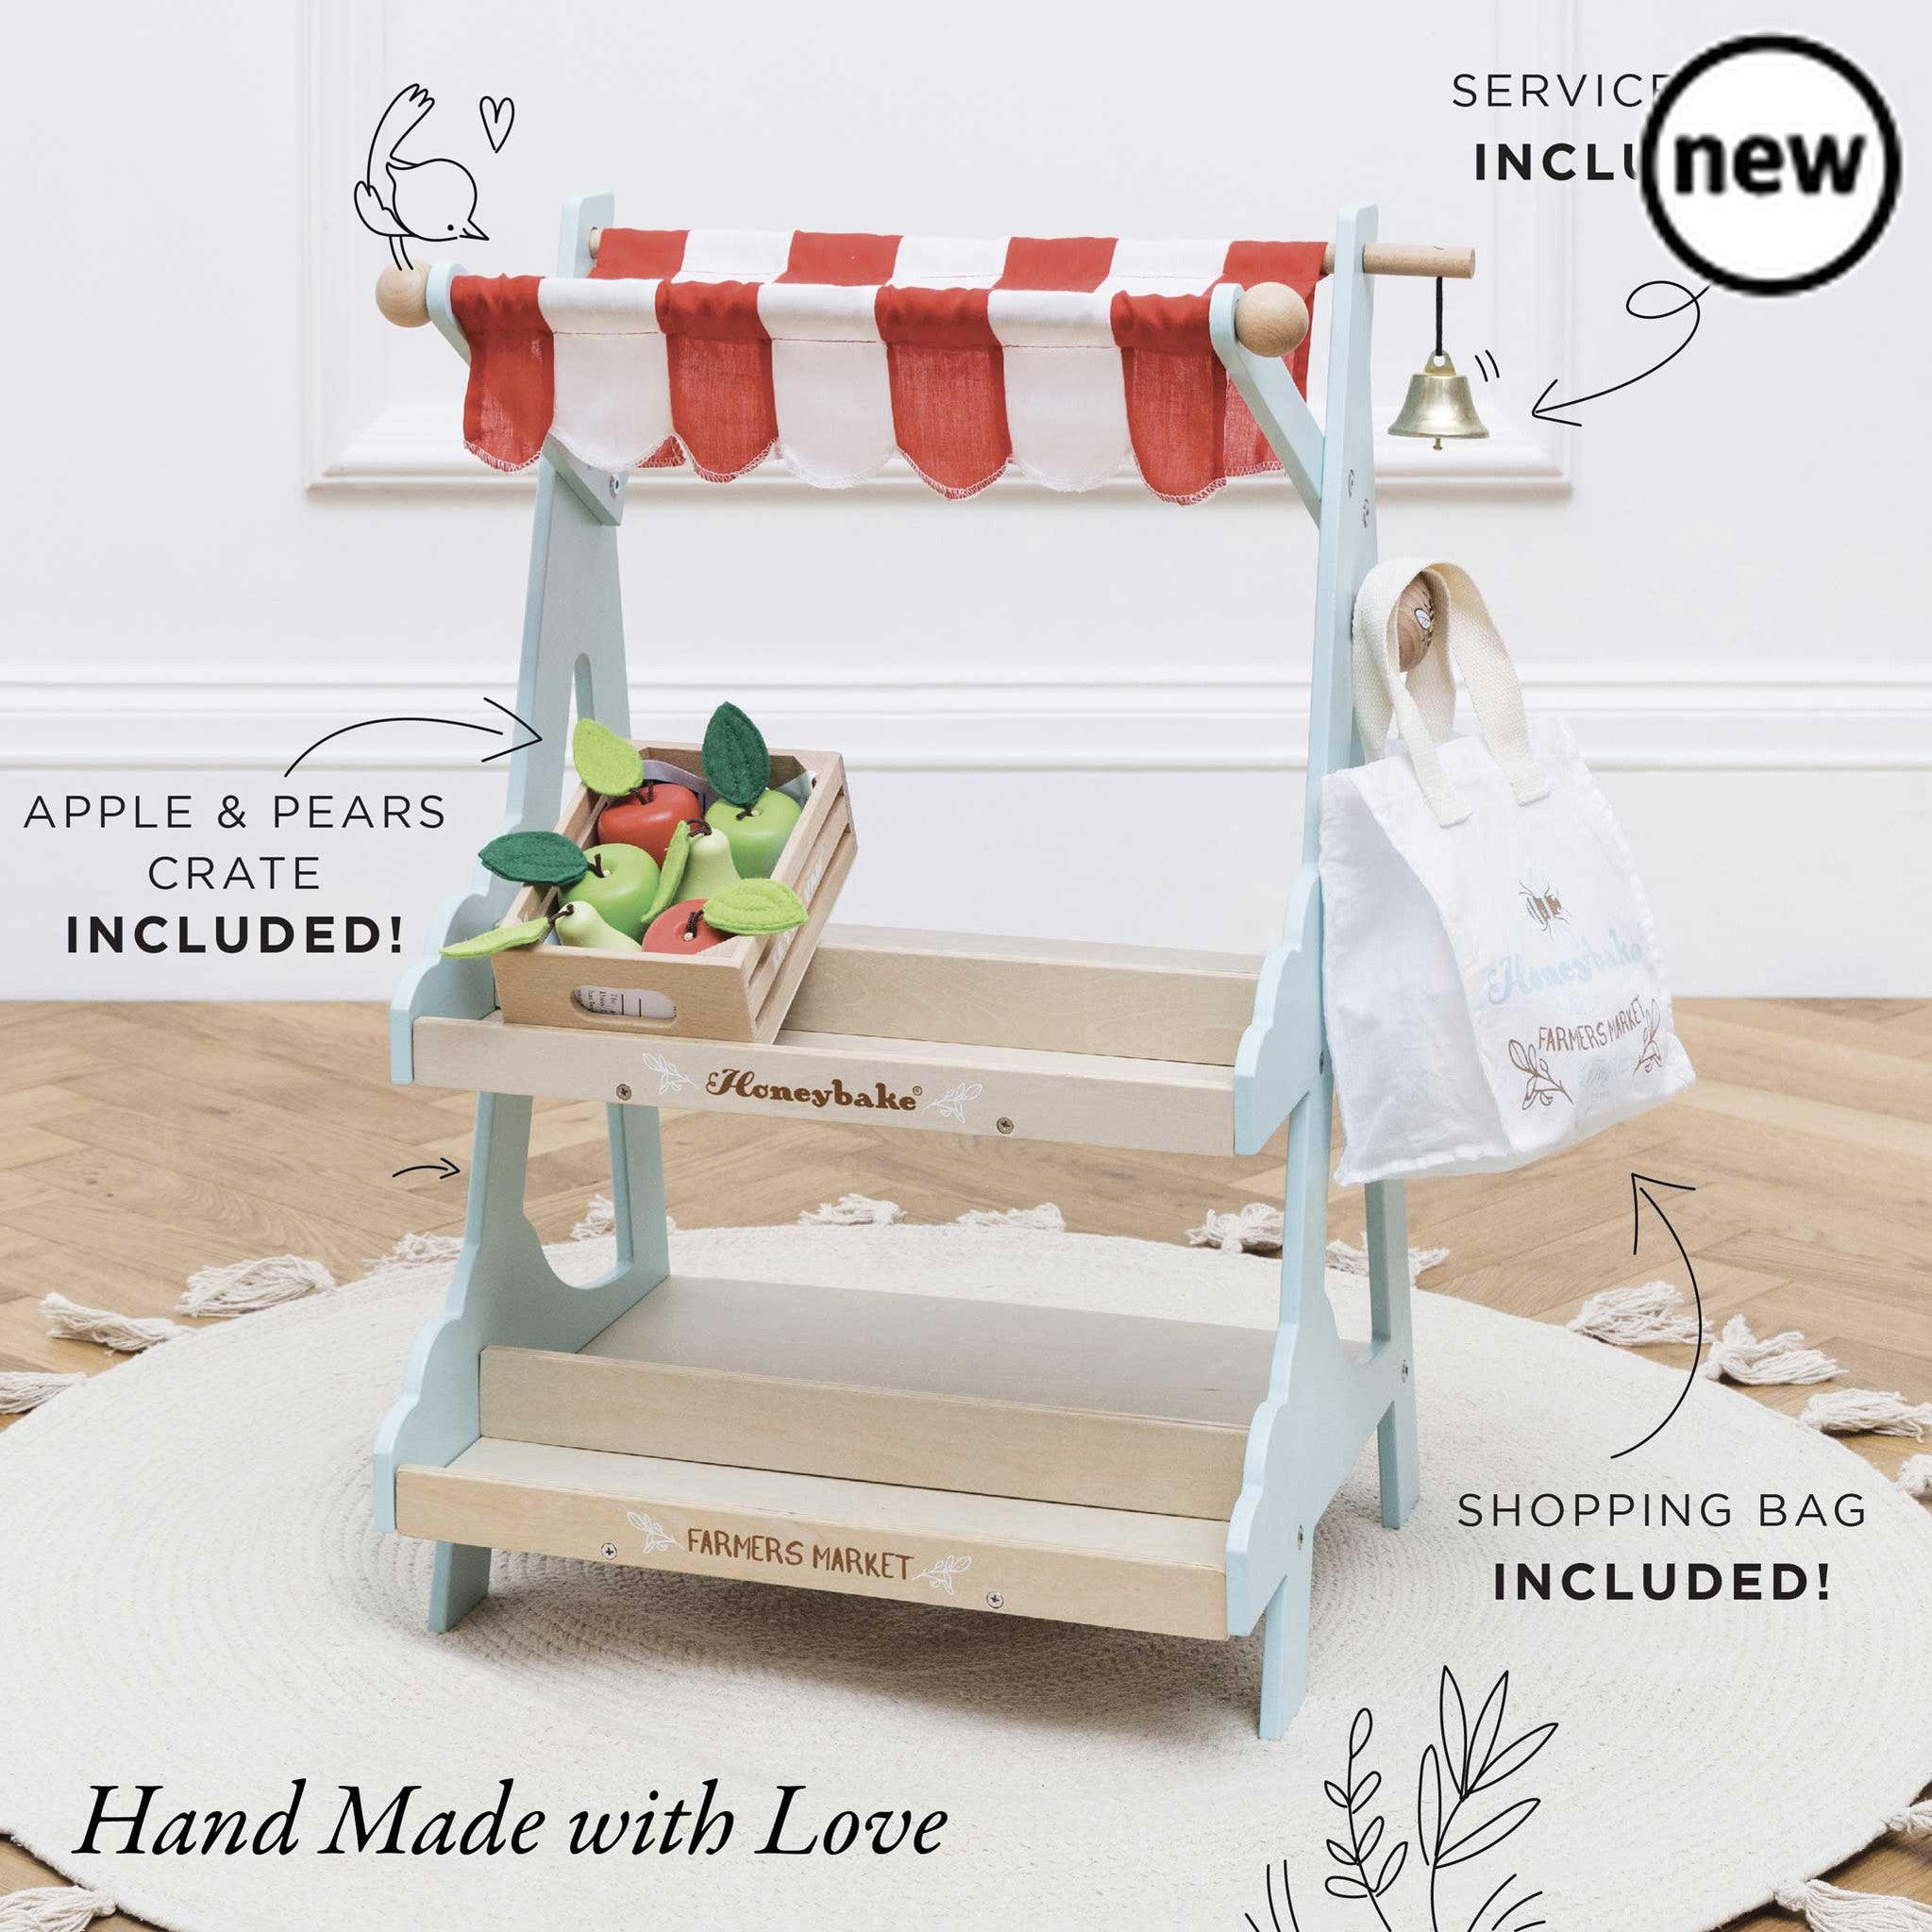 Honeybee Market, Description Our amazing wooden market stall is a multi award winner and a firm favourite. Designed by our team of talented toy makers for immersive roleplay, day after day. Complete with fabric shopping bag and a crate of apples and pears. Little ones will adore serving customers at the market style shop complete with shelves, ideal for housing our wooden food crates. Featuring a fabric shopping bag, apple's and pears crate, & bell for customers to ring for attention. This impressive early 